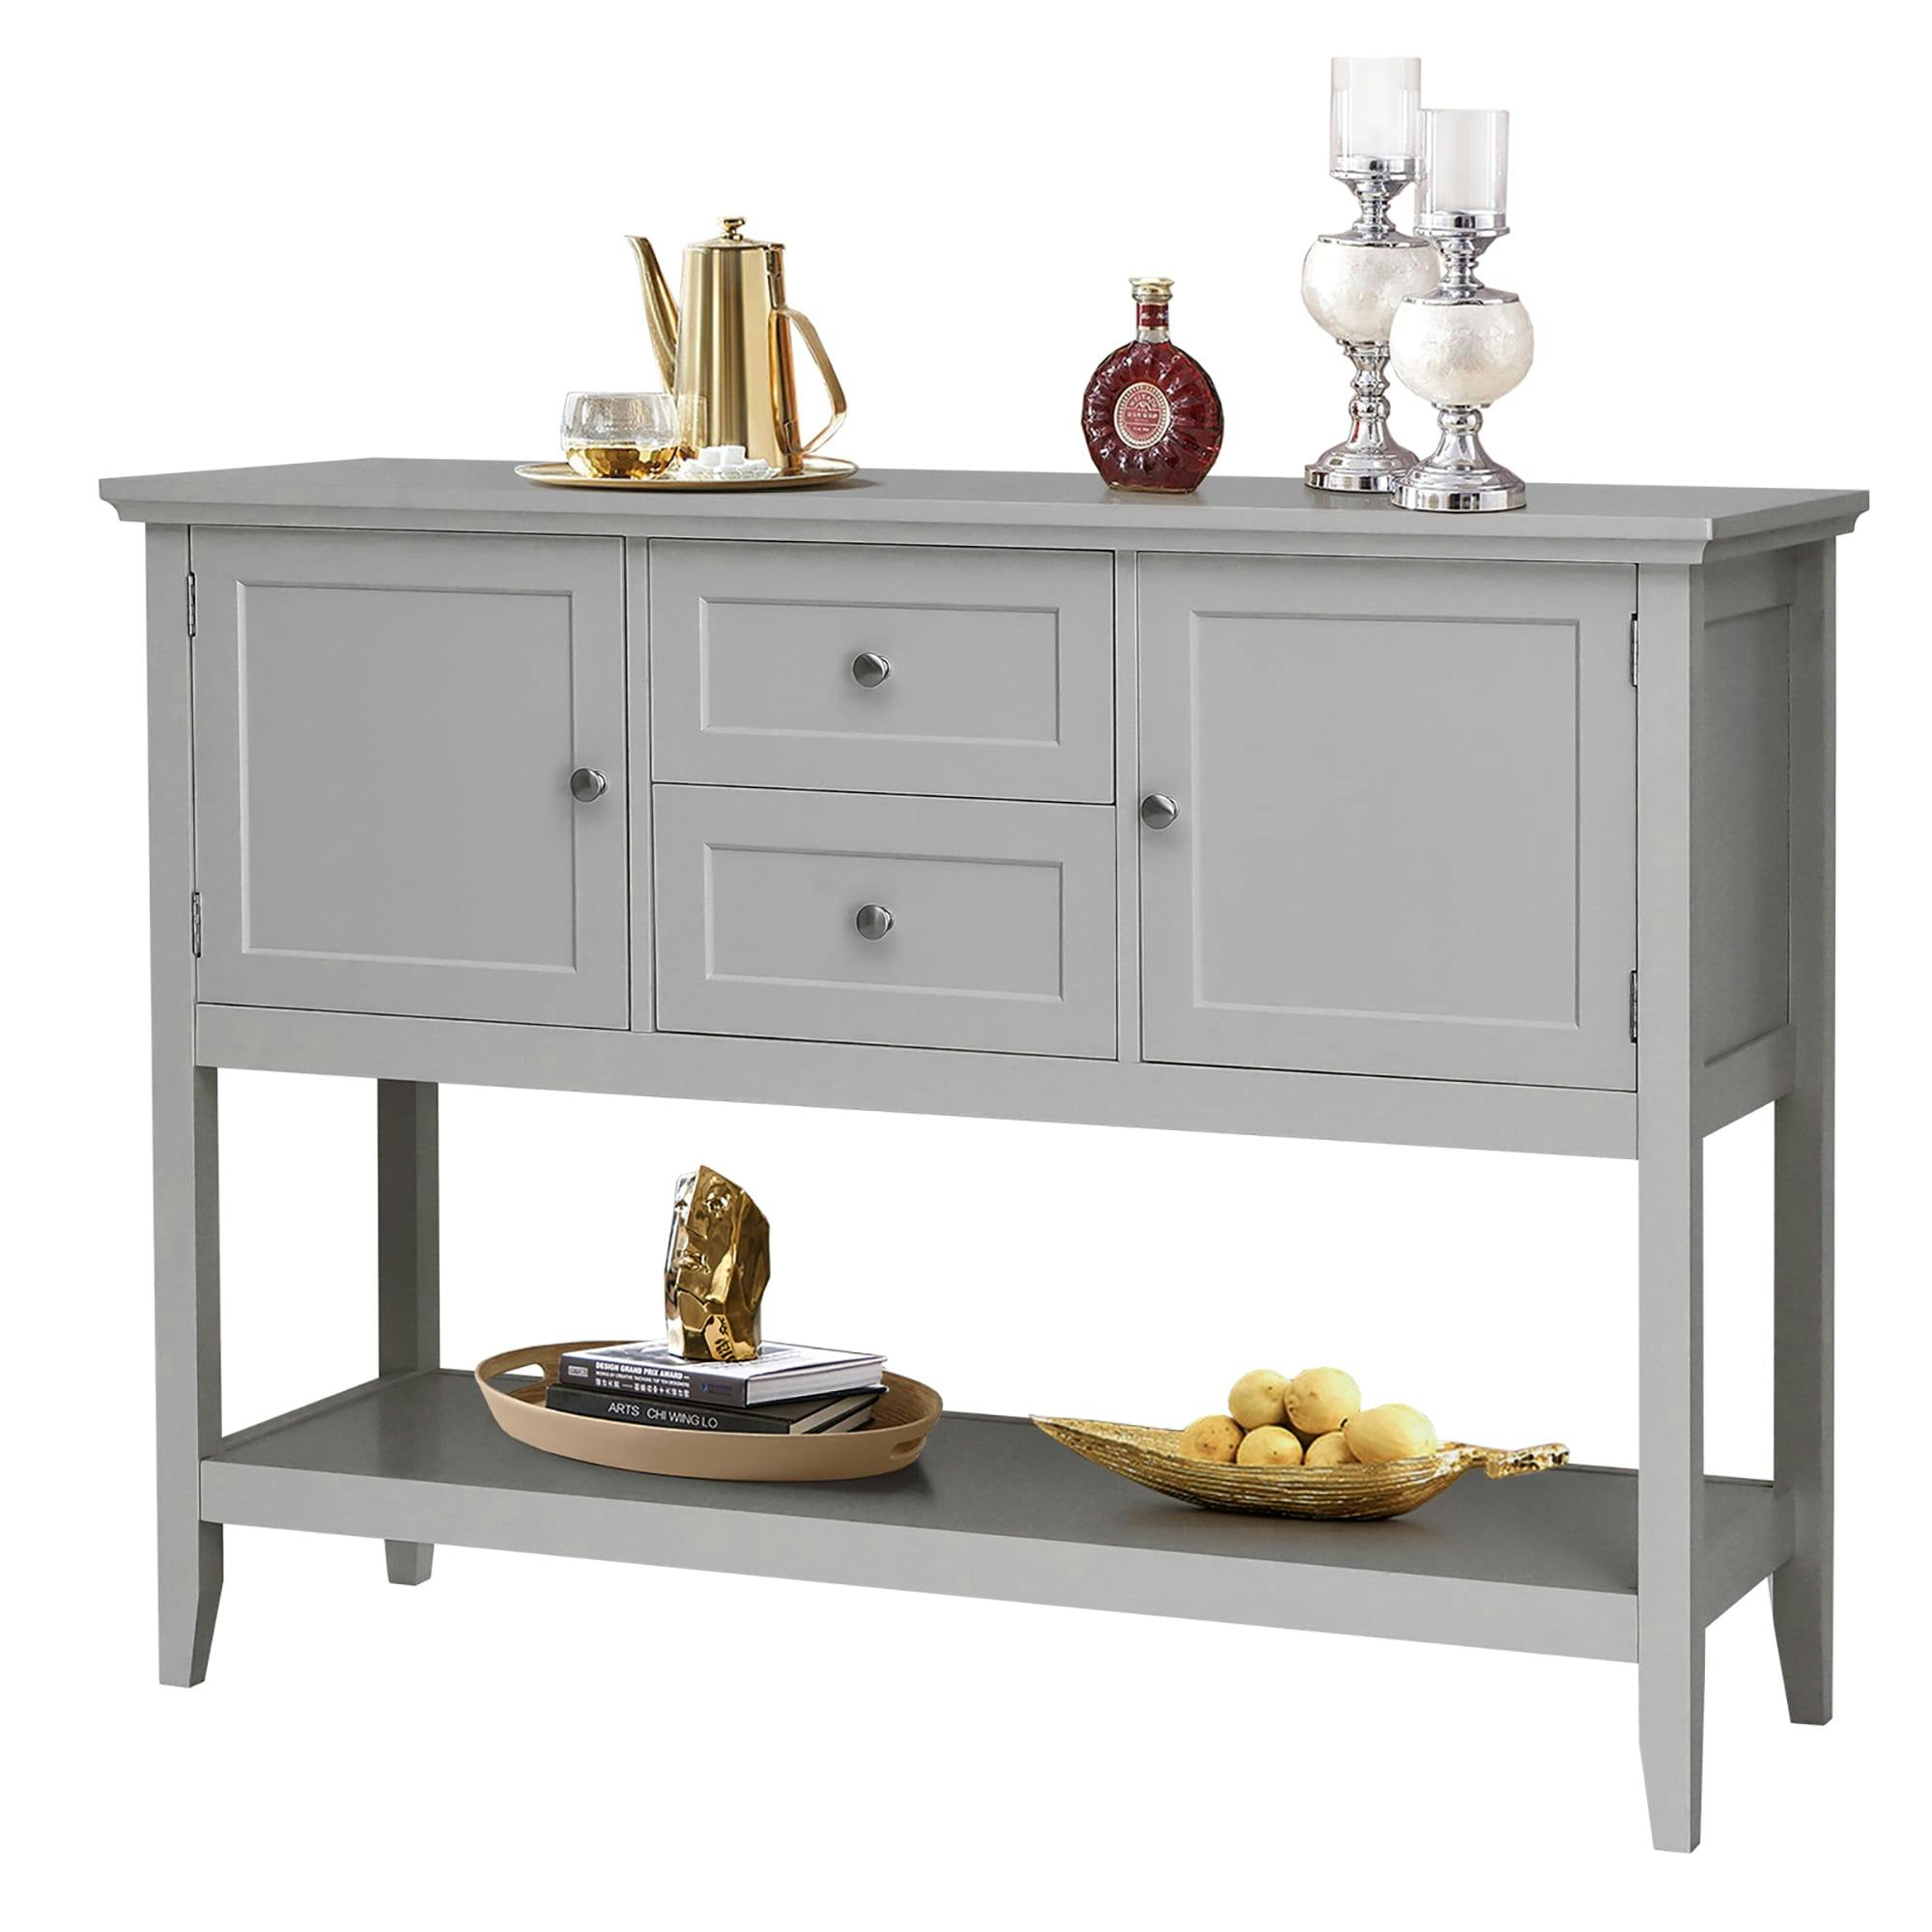 Elegant Gray Wooden Sideboard with Ample Storage and Display Shelf